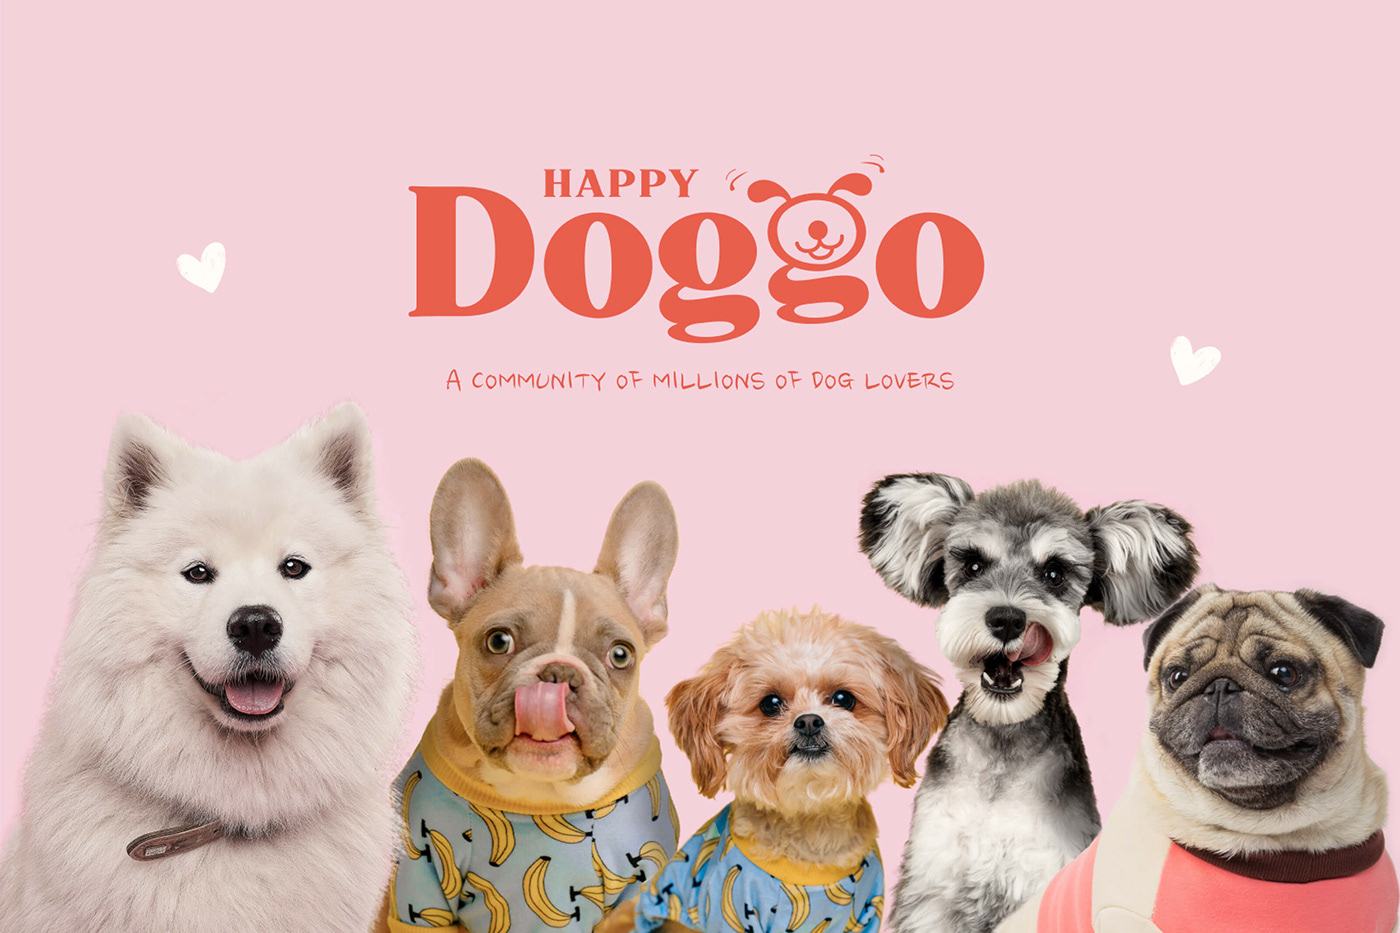 animals branding  Character community cute dog dogs pets puppy Website